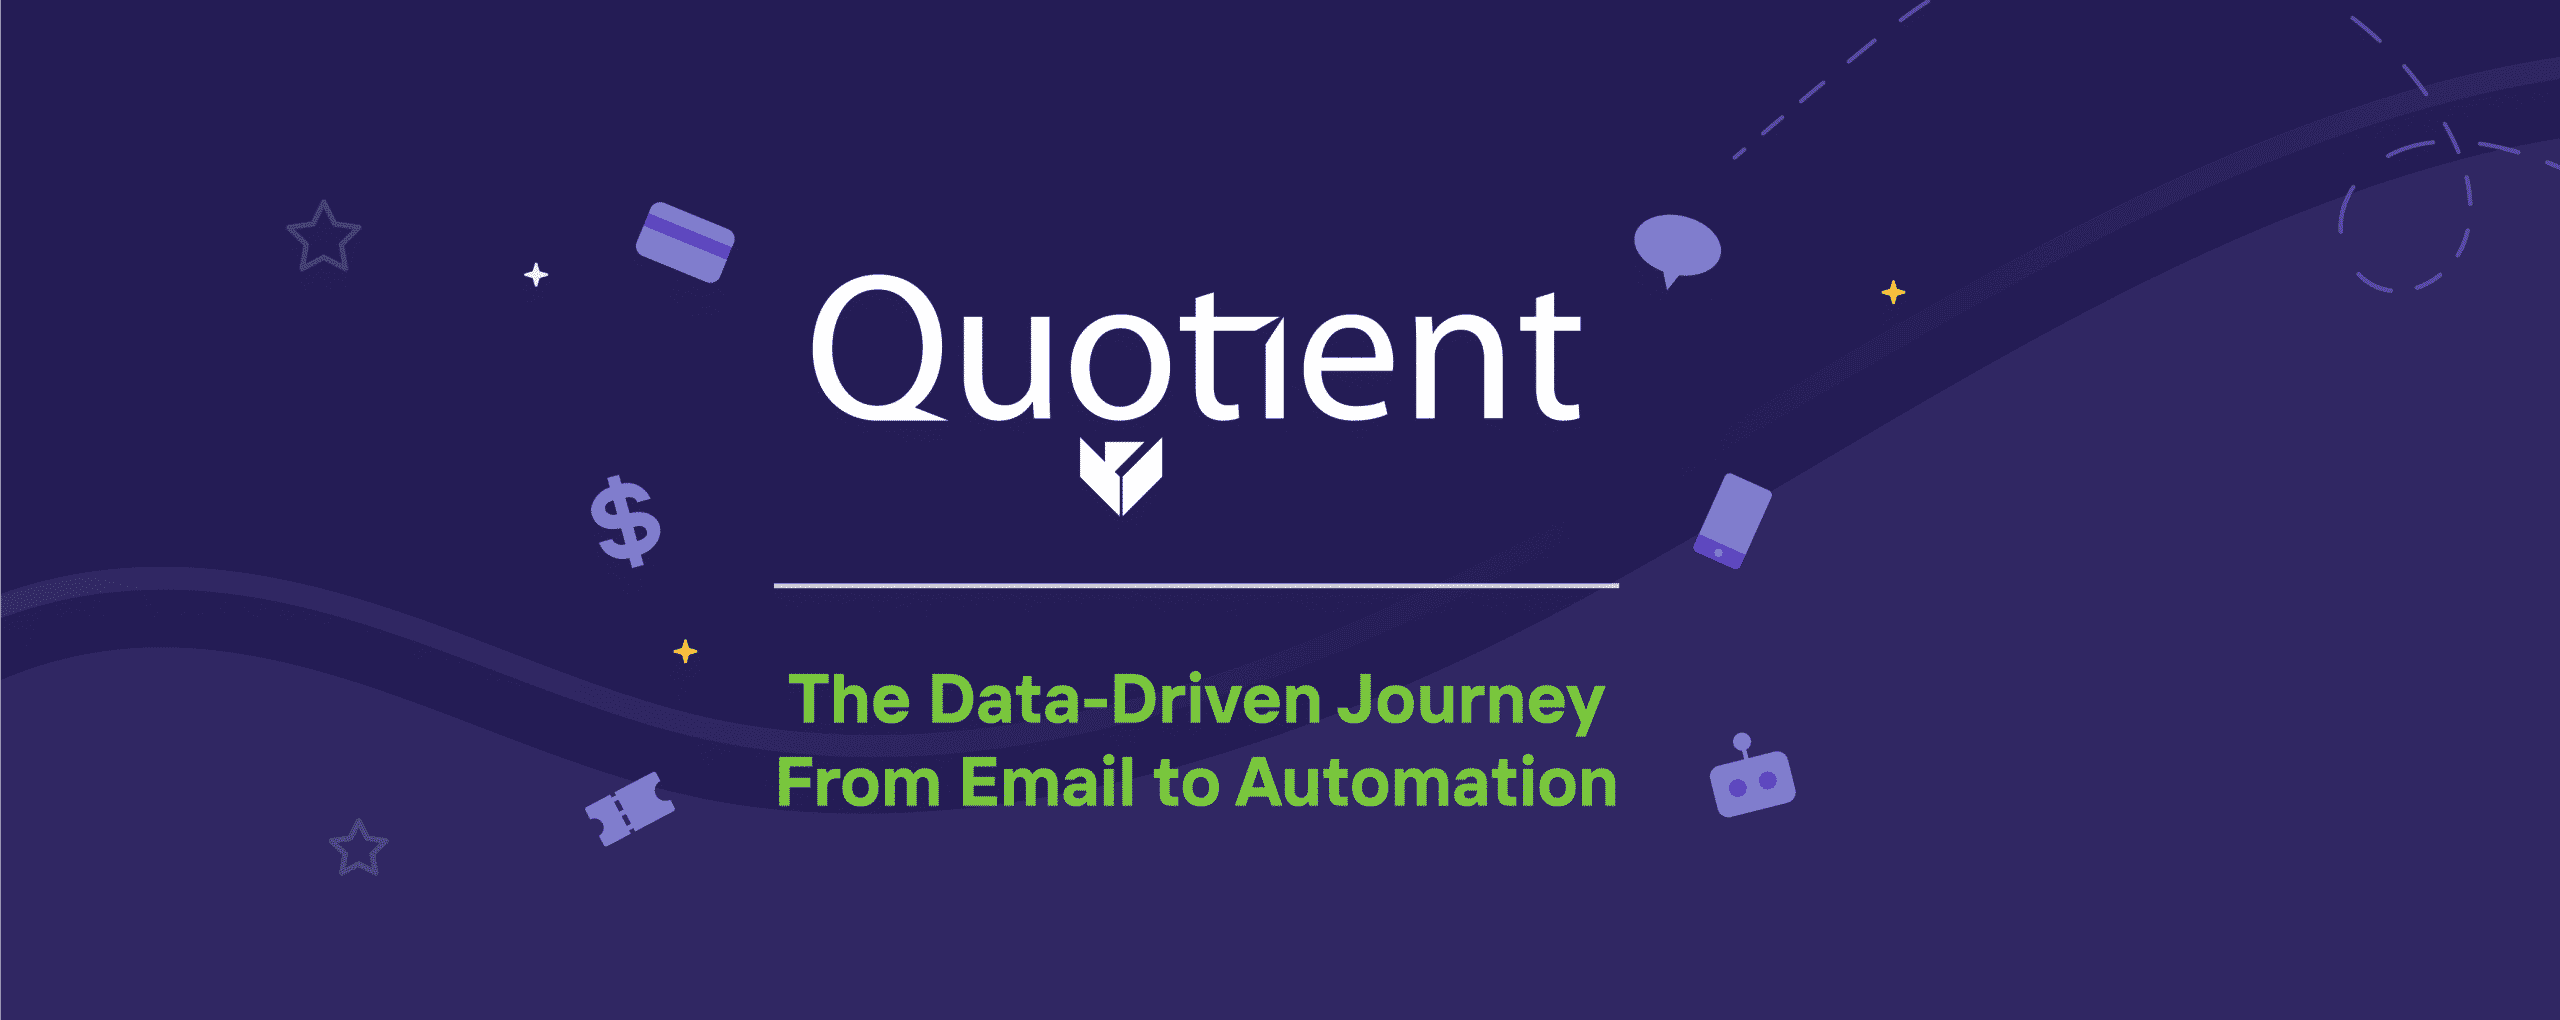 “The Data-Driven Journey from Email to Automation” Recap